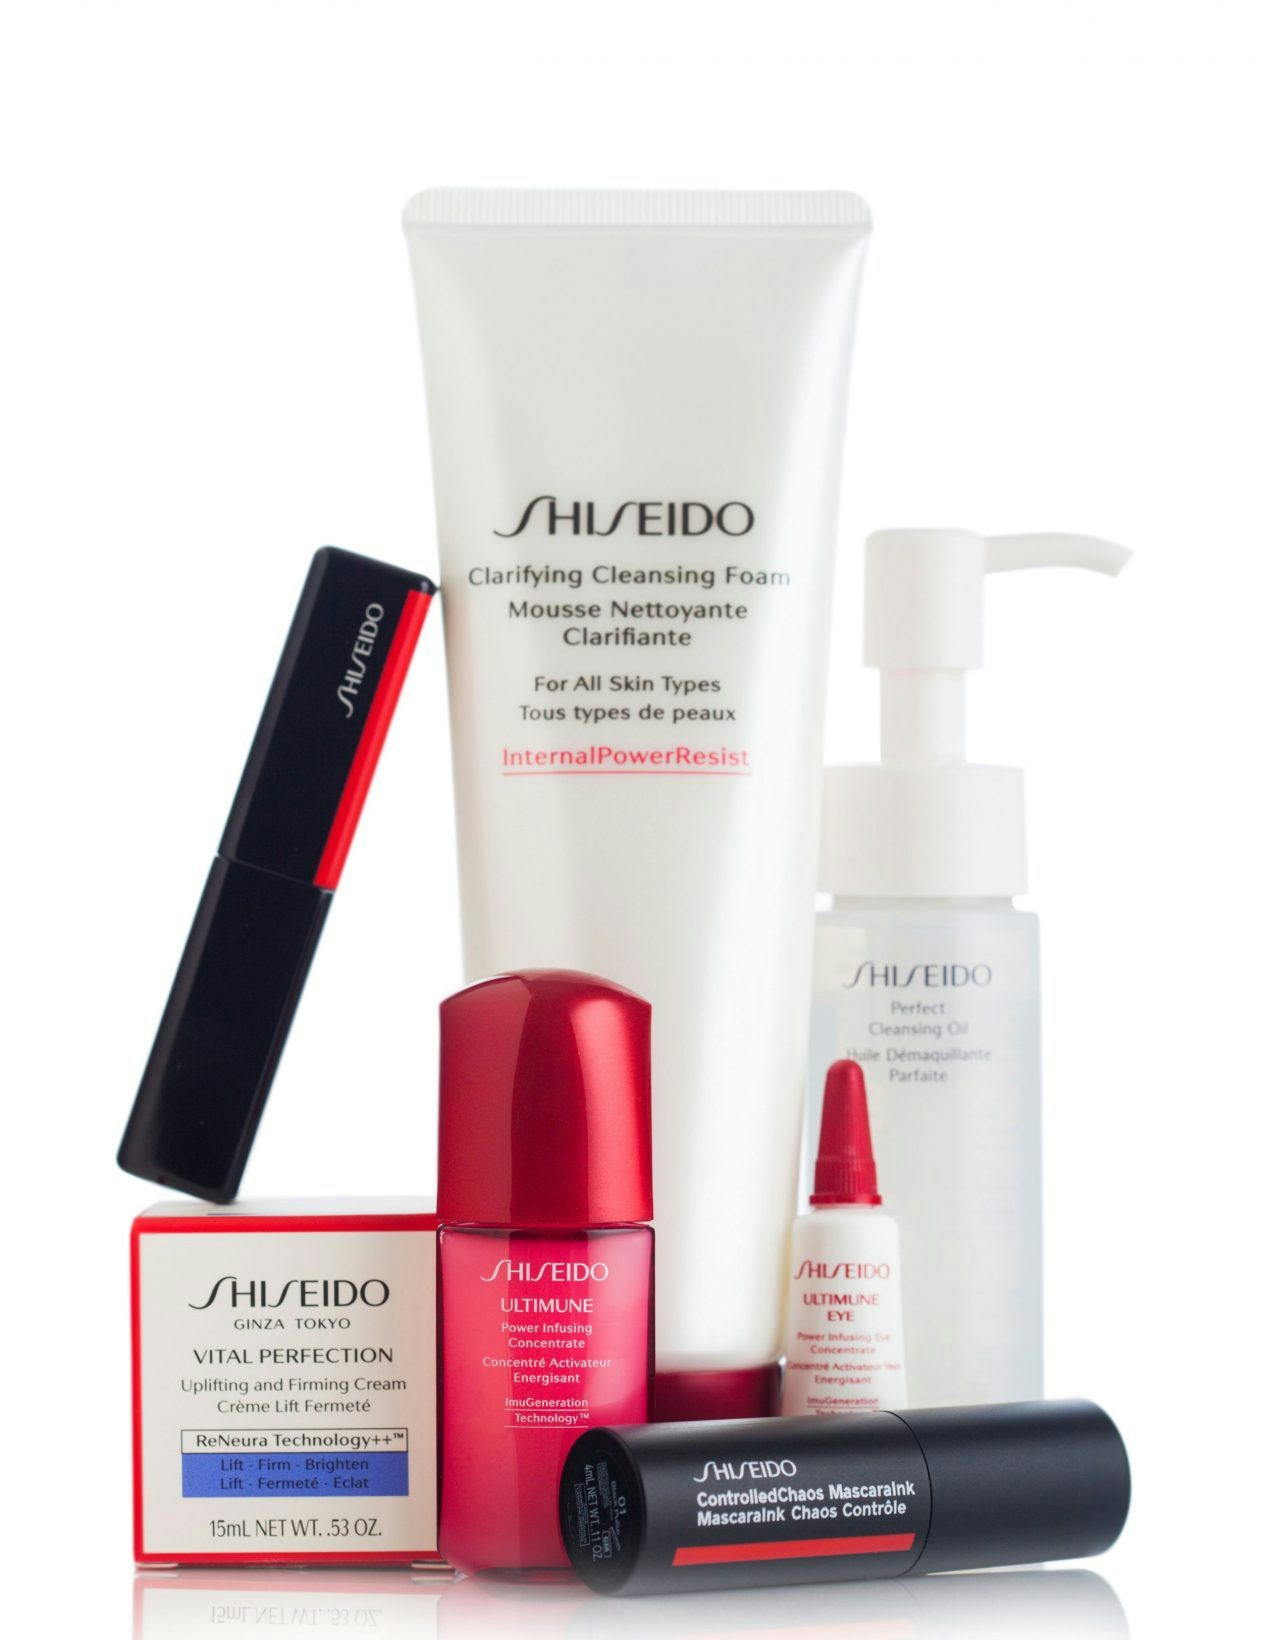 Shiseido Group focuses on innovation and traceability